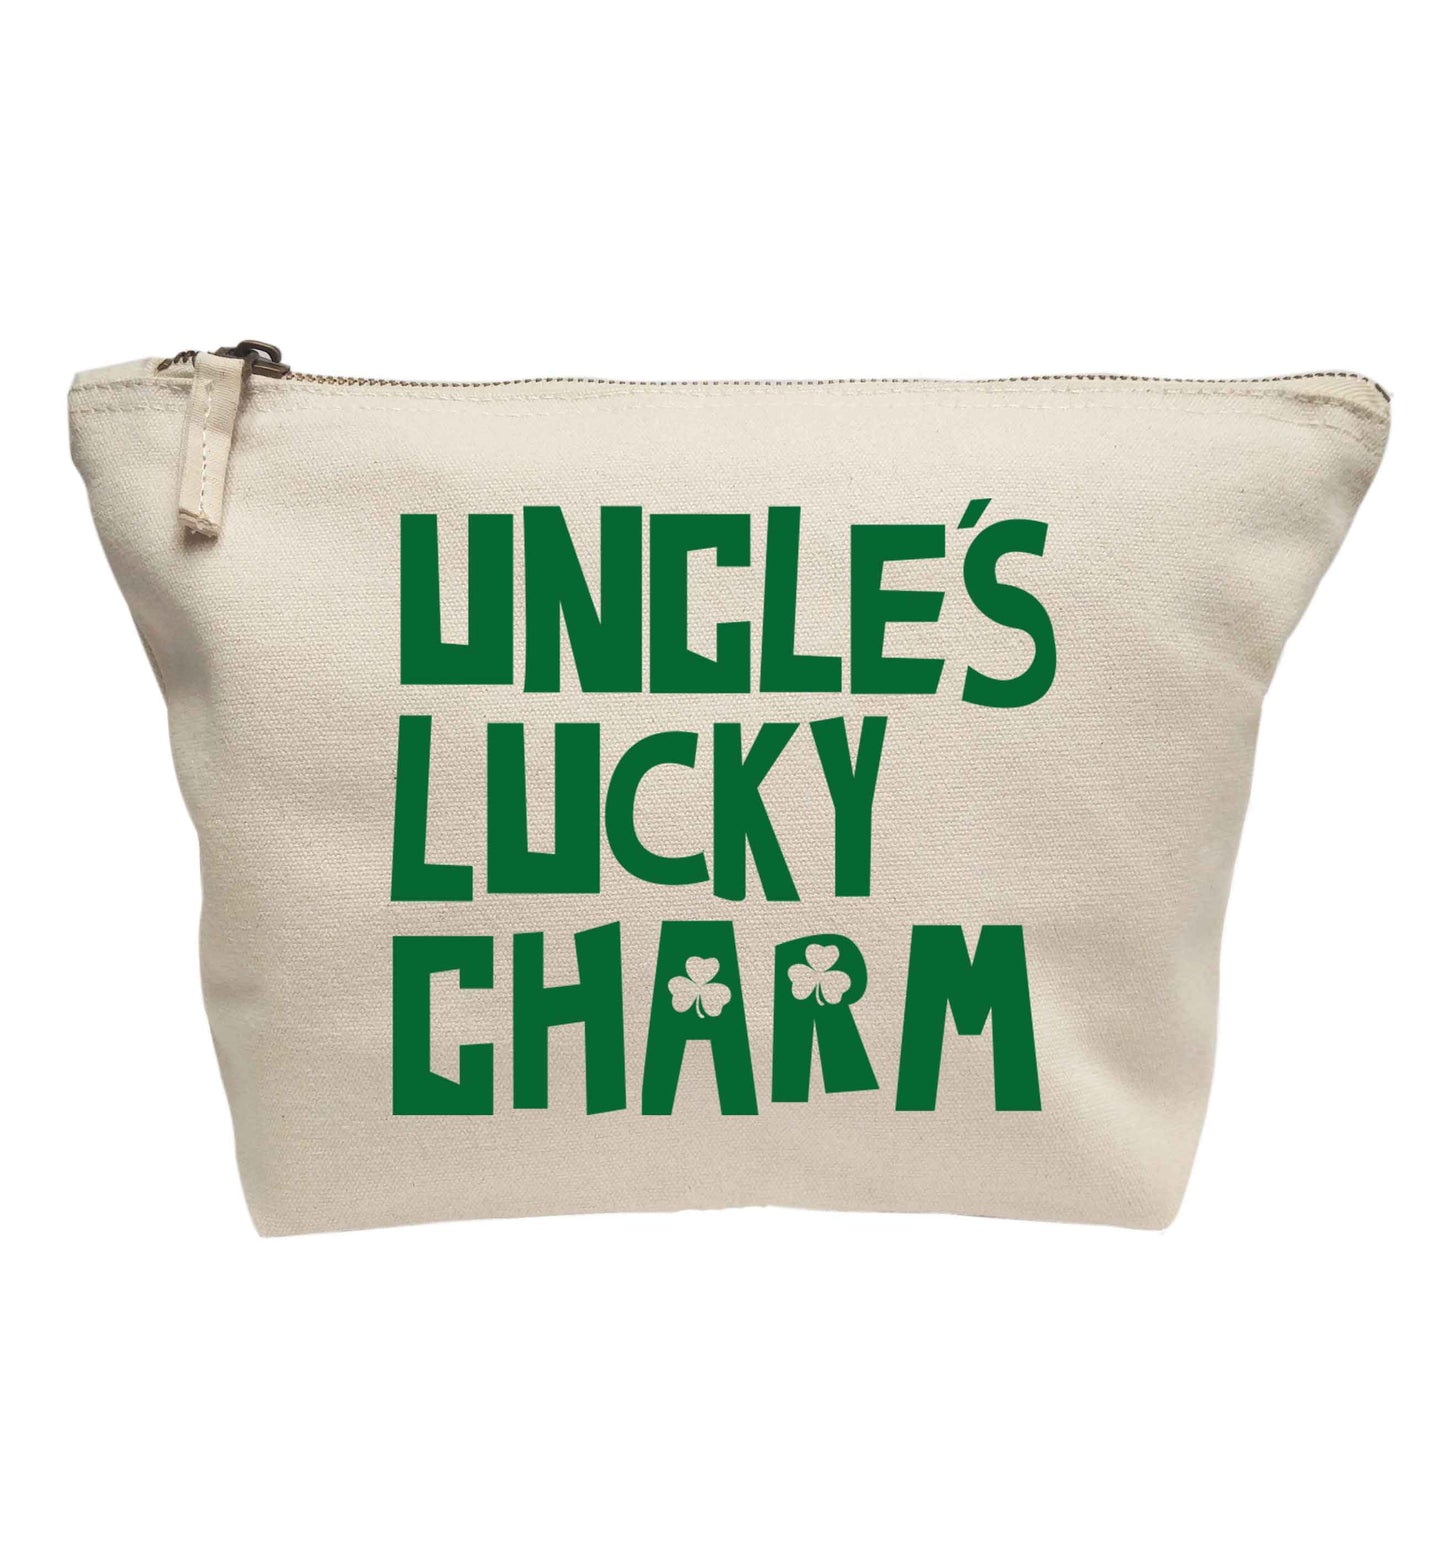 Uncles lucky charm | Makeup / wash bag